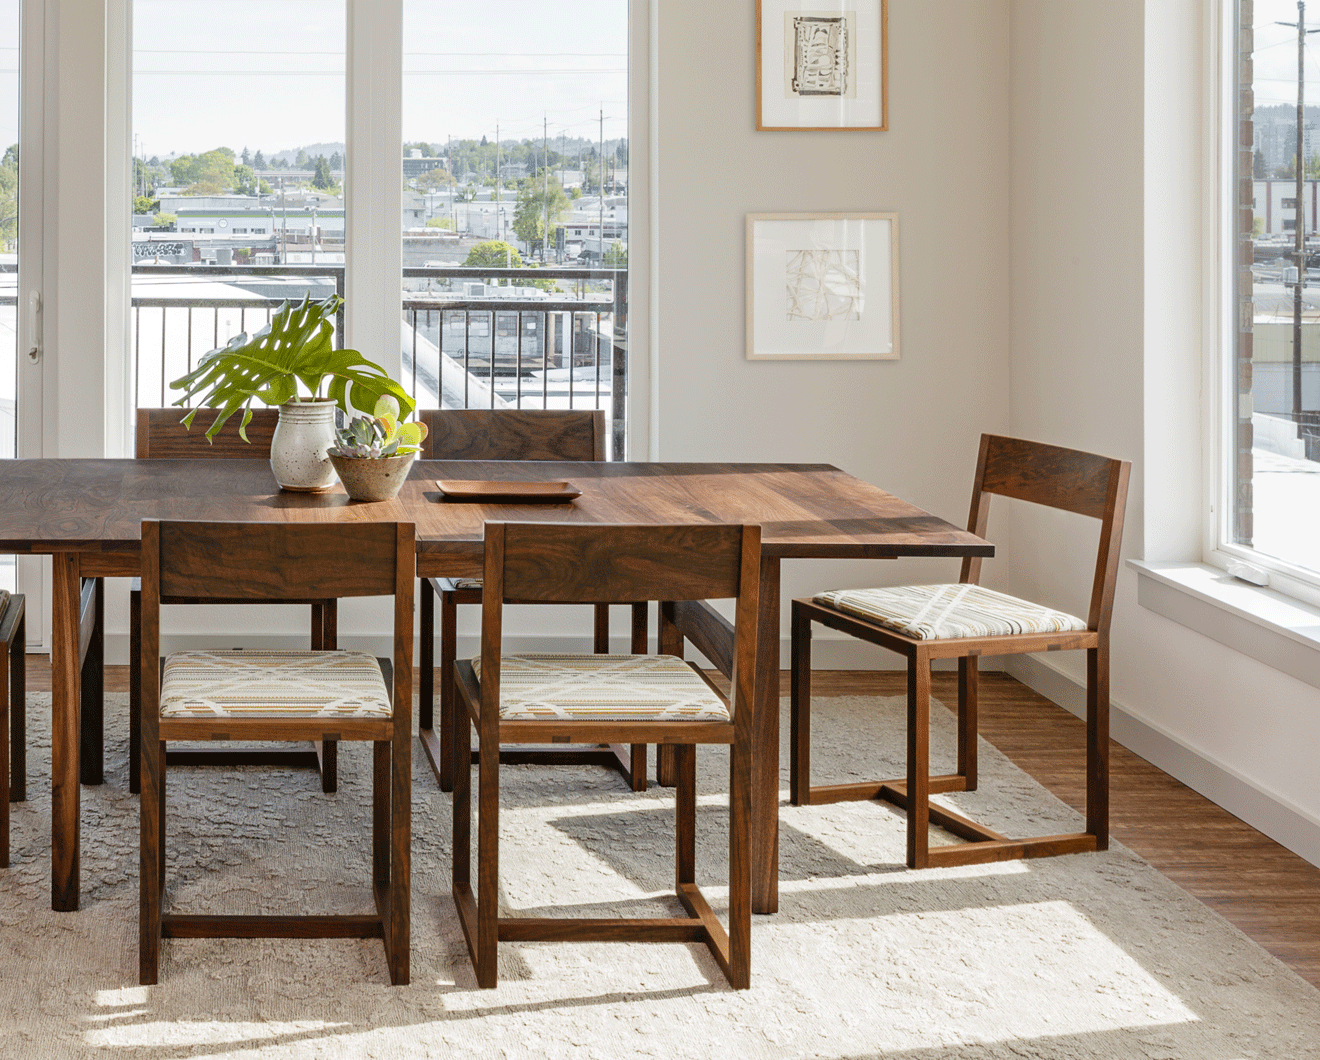 Celilo Dining Chair in Eastern Walnut with Celilo Dining Table